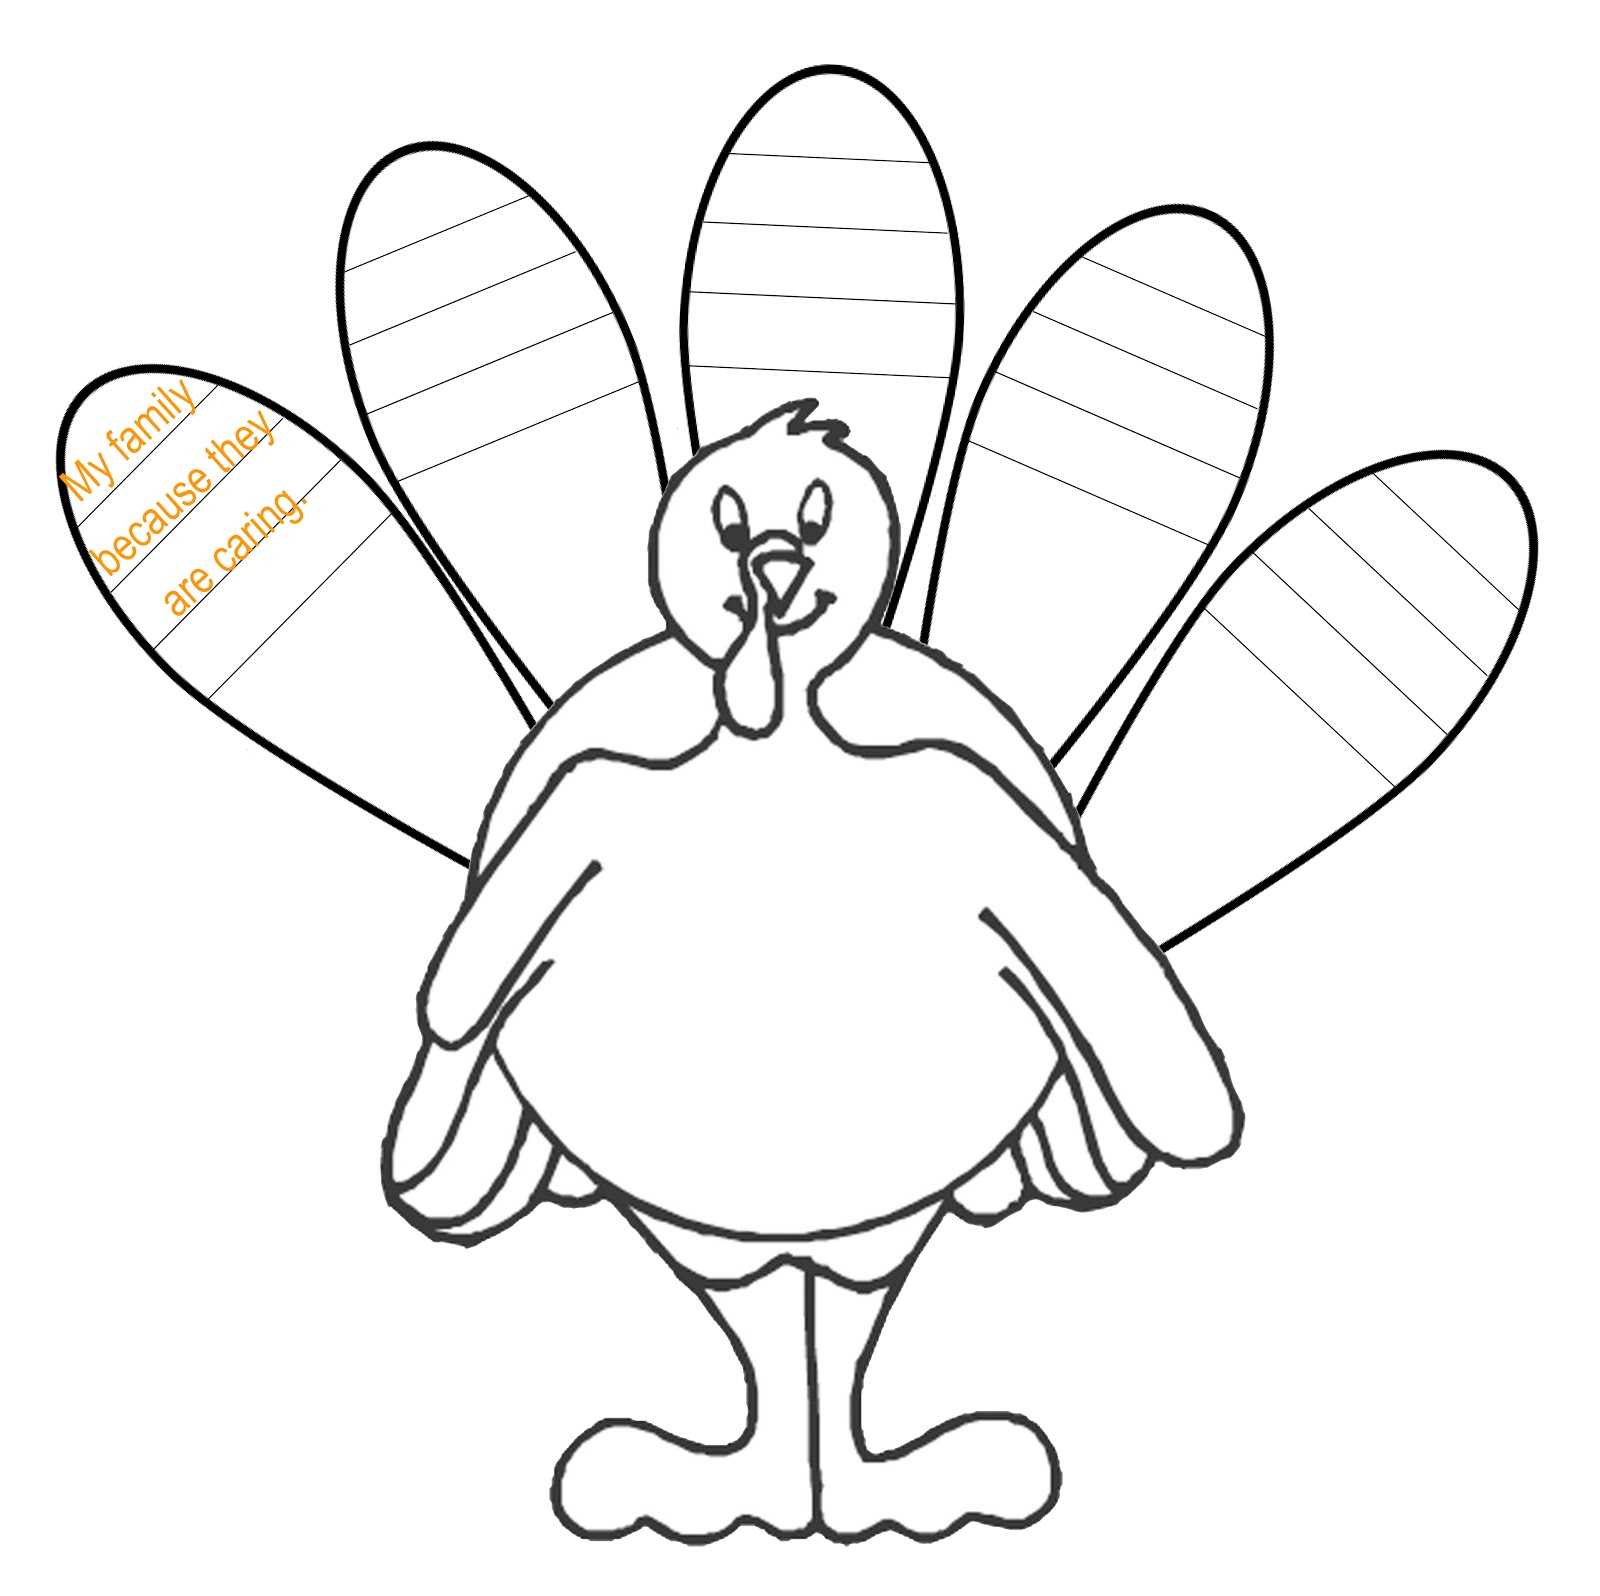 Coloring Pages : Clip Art Coloring Thanksgiving Free With Blank Turkey Template